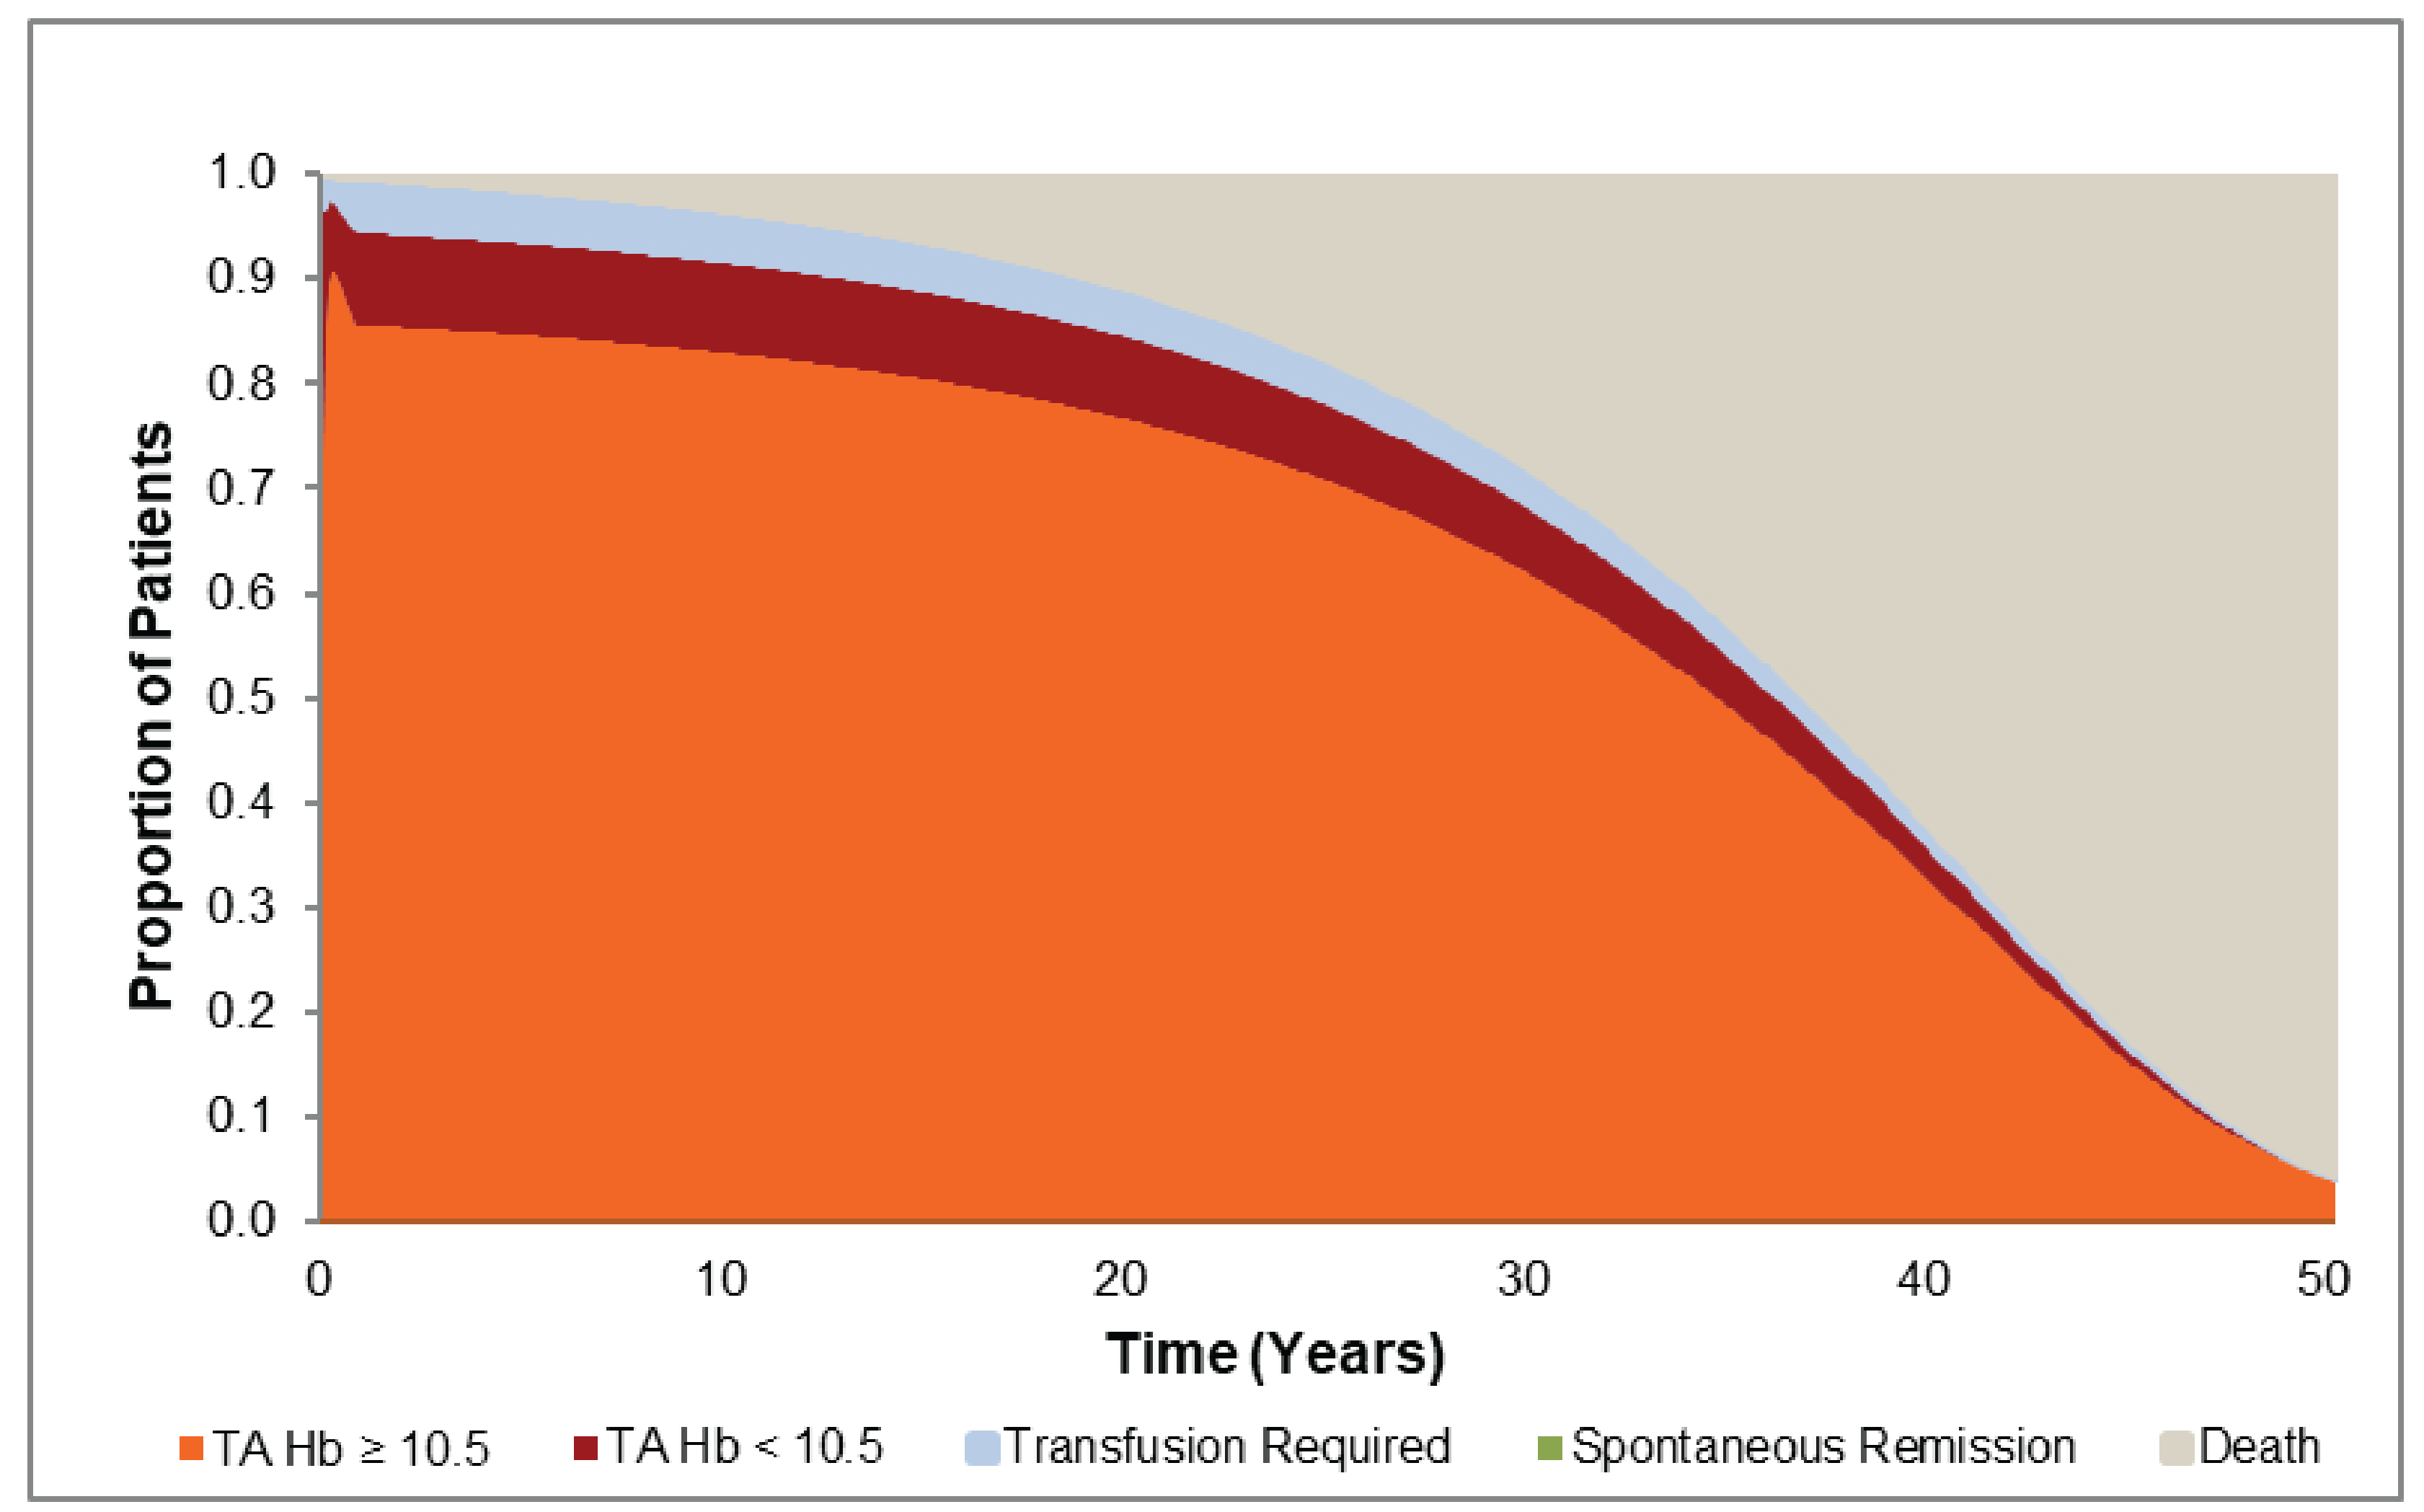 The figure shows the proportion of patients in each health state over the modelled time horizon. Majority of patients are in the TA Hb ≥ 10.5 health state at the start of the model and, with time, a larger proportion of patients enter the death health.